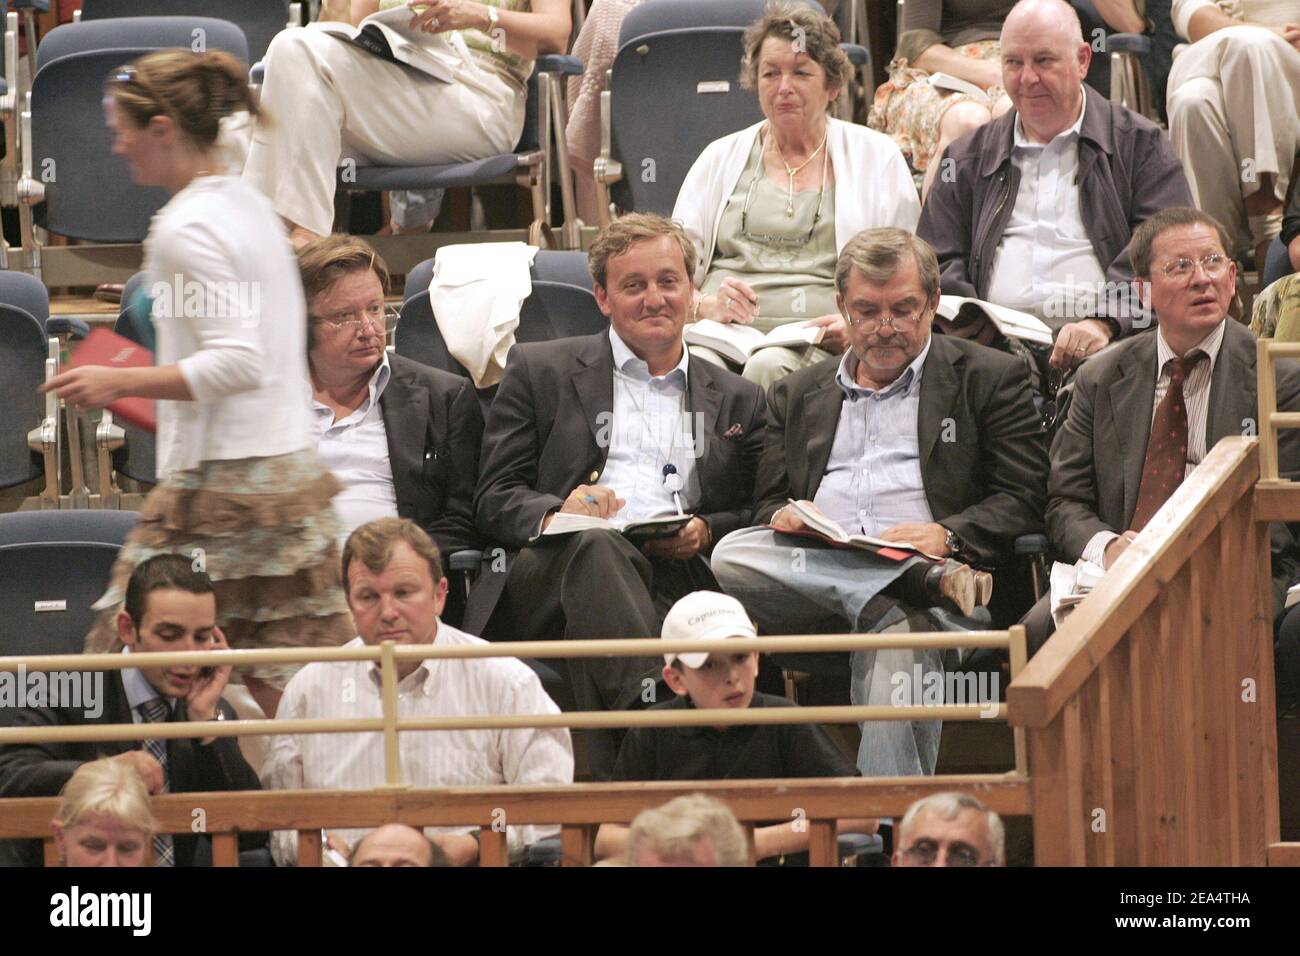 Three buyers for Dubai's cheikh Mohammed al Maktoum attend a yearling sale in Deauville, Normandy, France, on August 21, 2005. Photo by Thierry Orban/ABCAPRESS.COM. Stock Photo